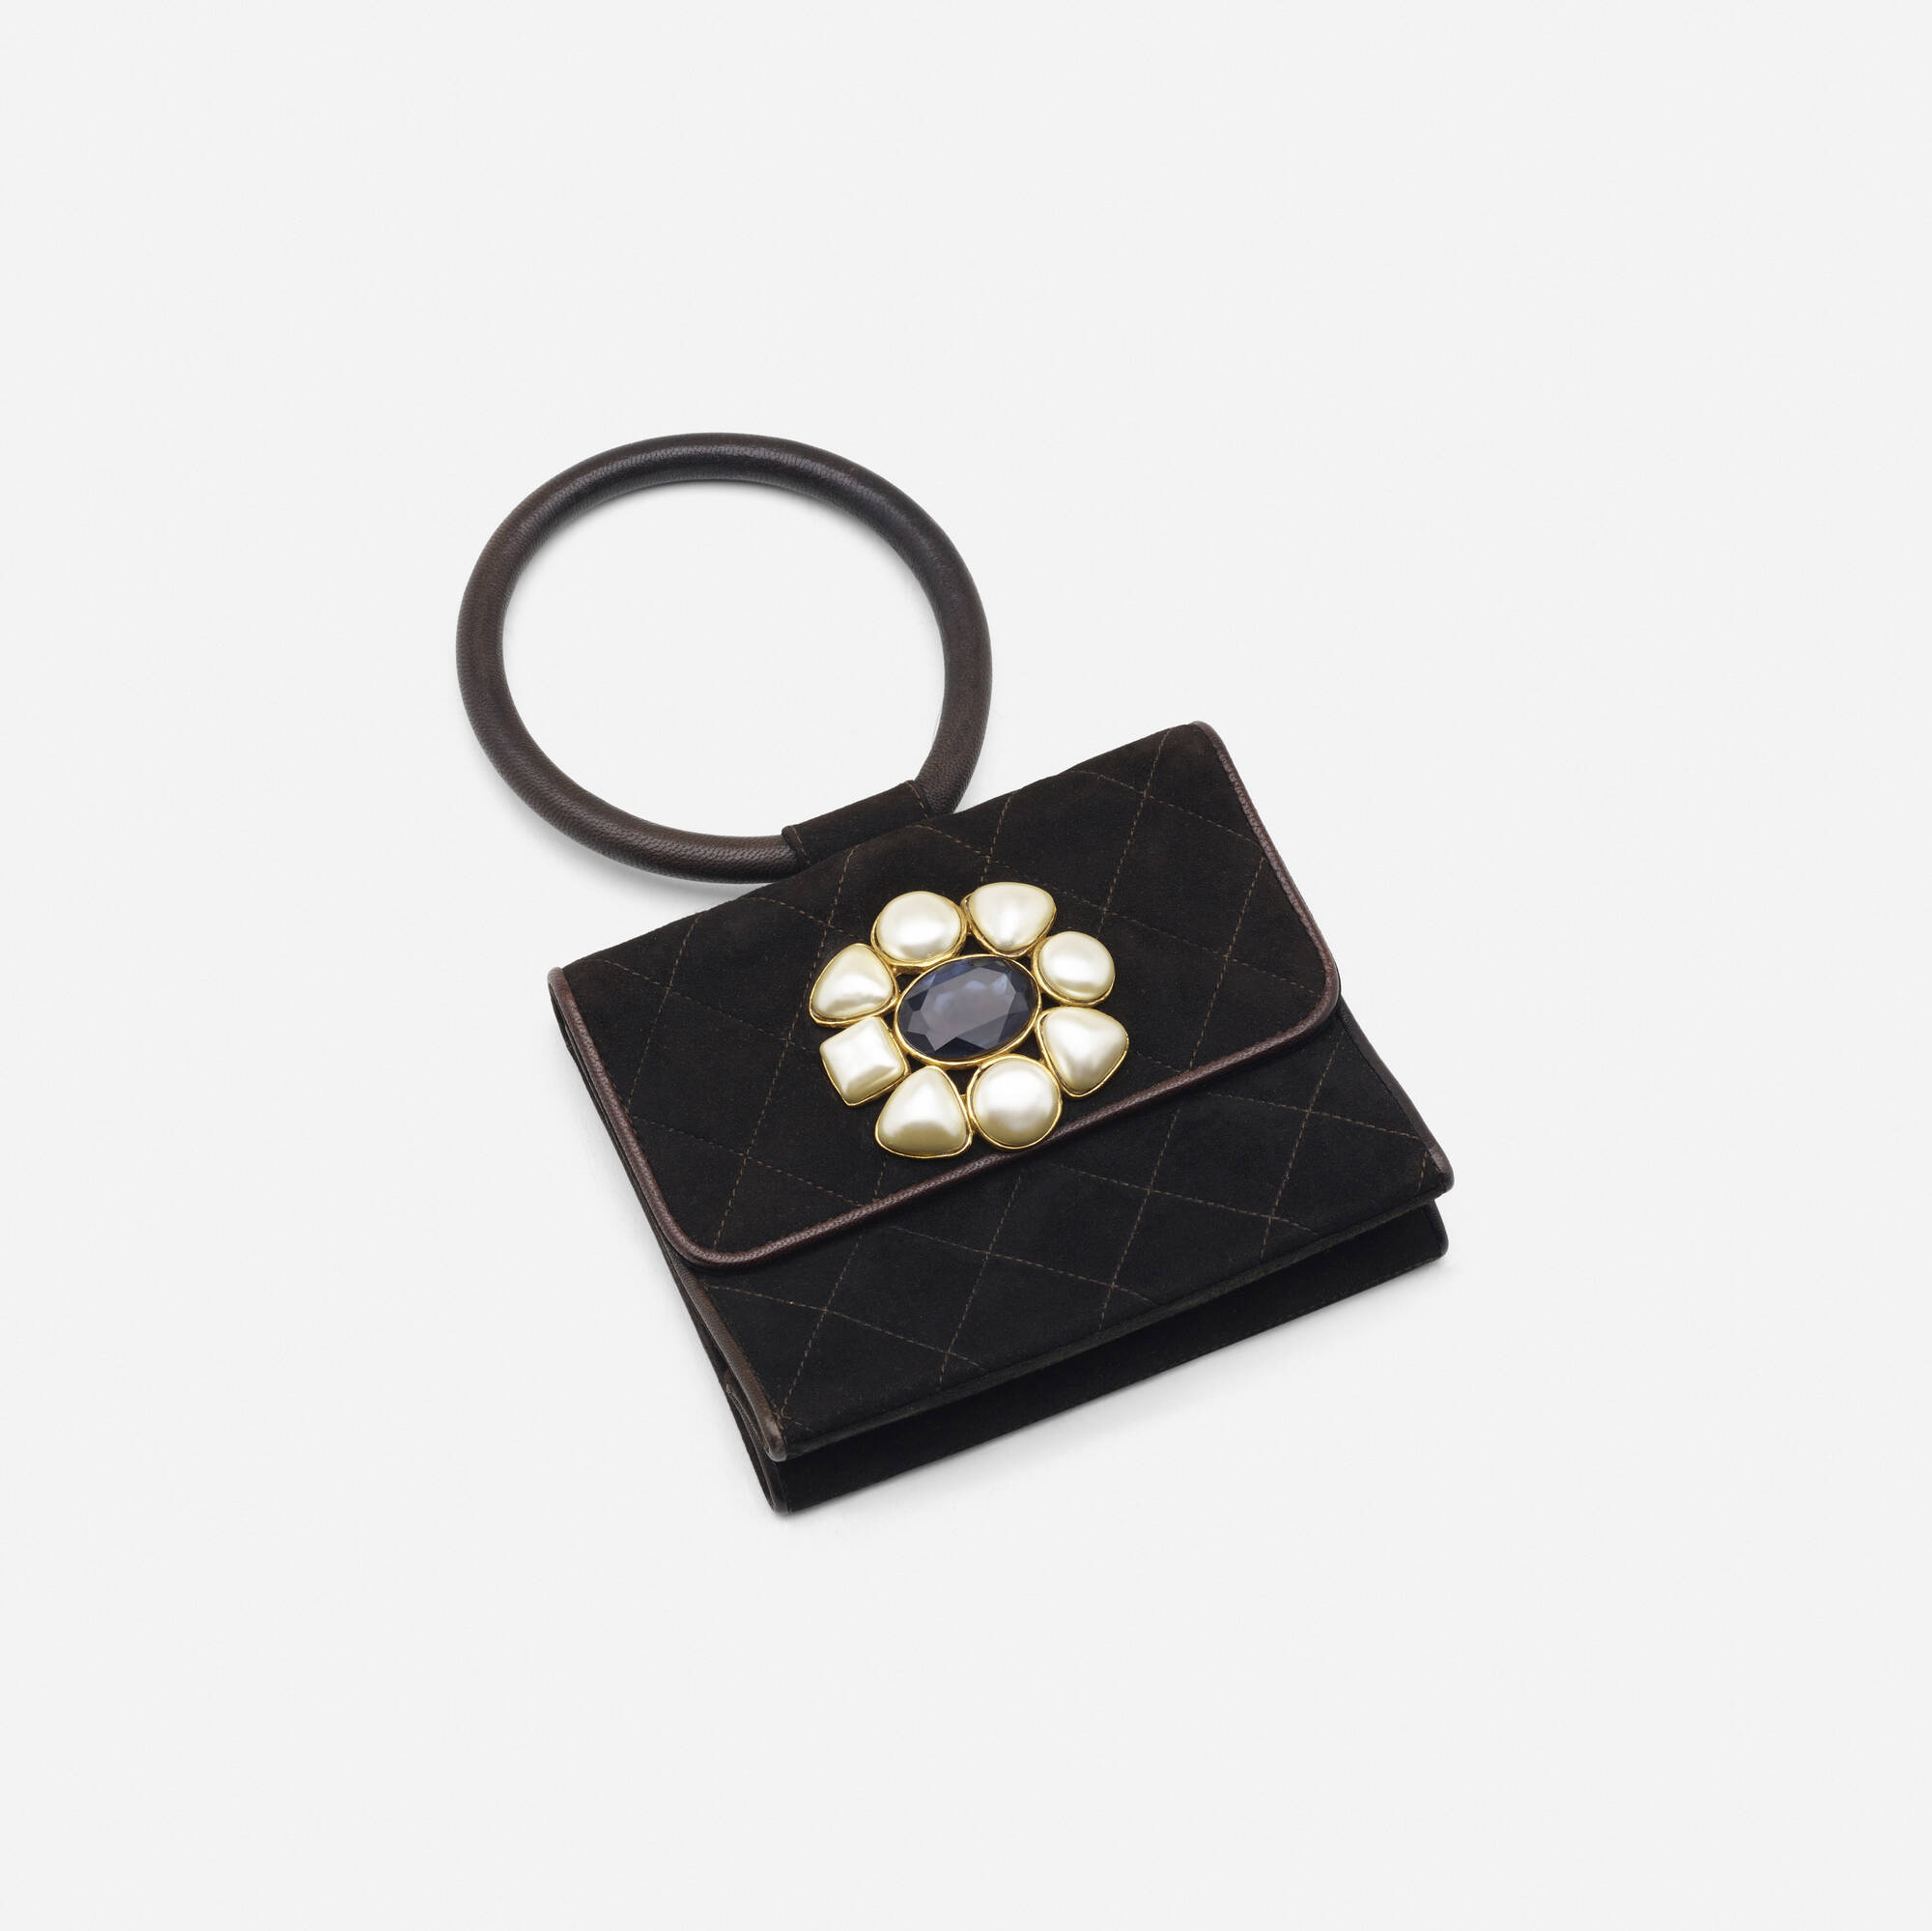 399: CHANEL, Suede mini-bag with faux pearls and faceted stone